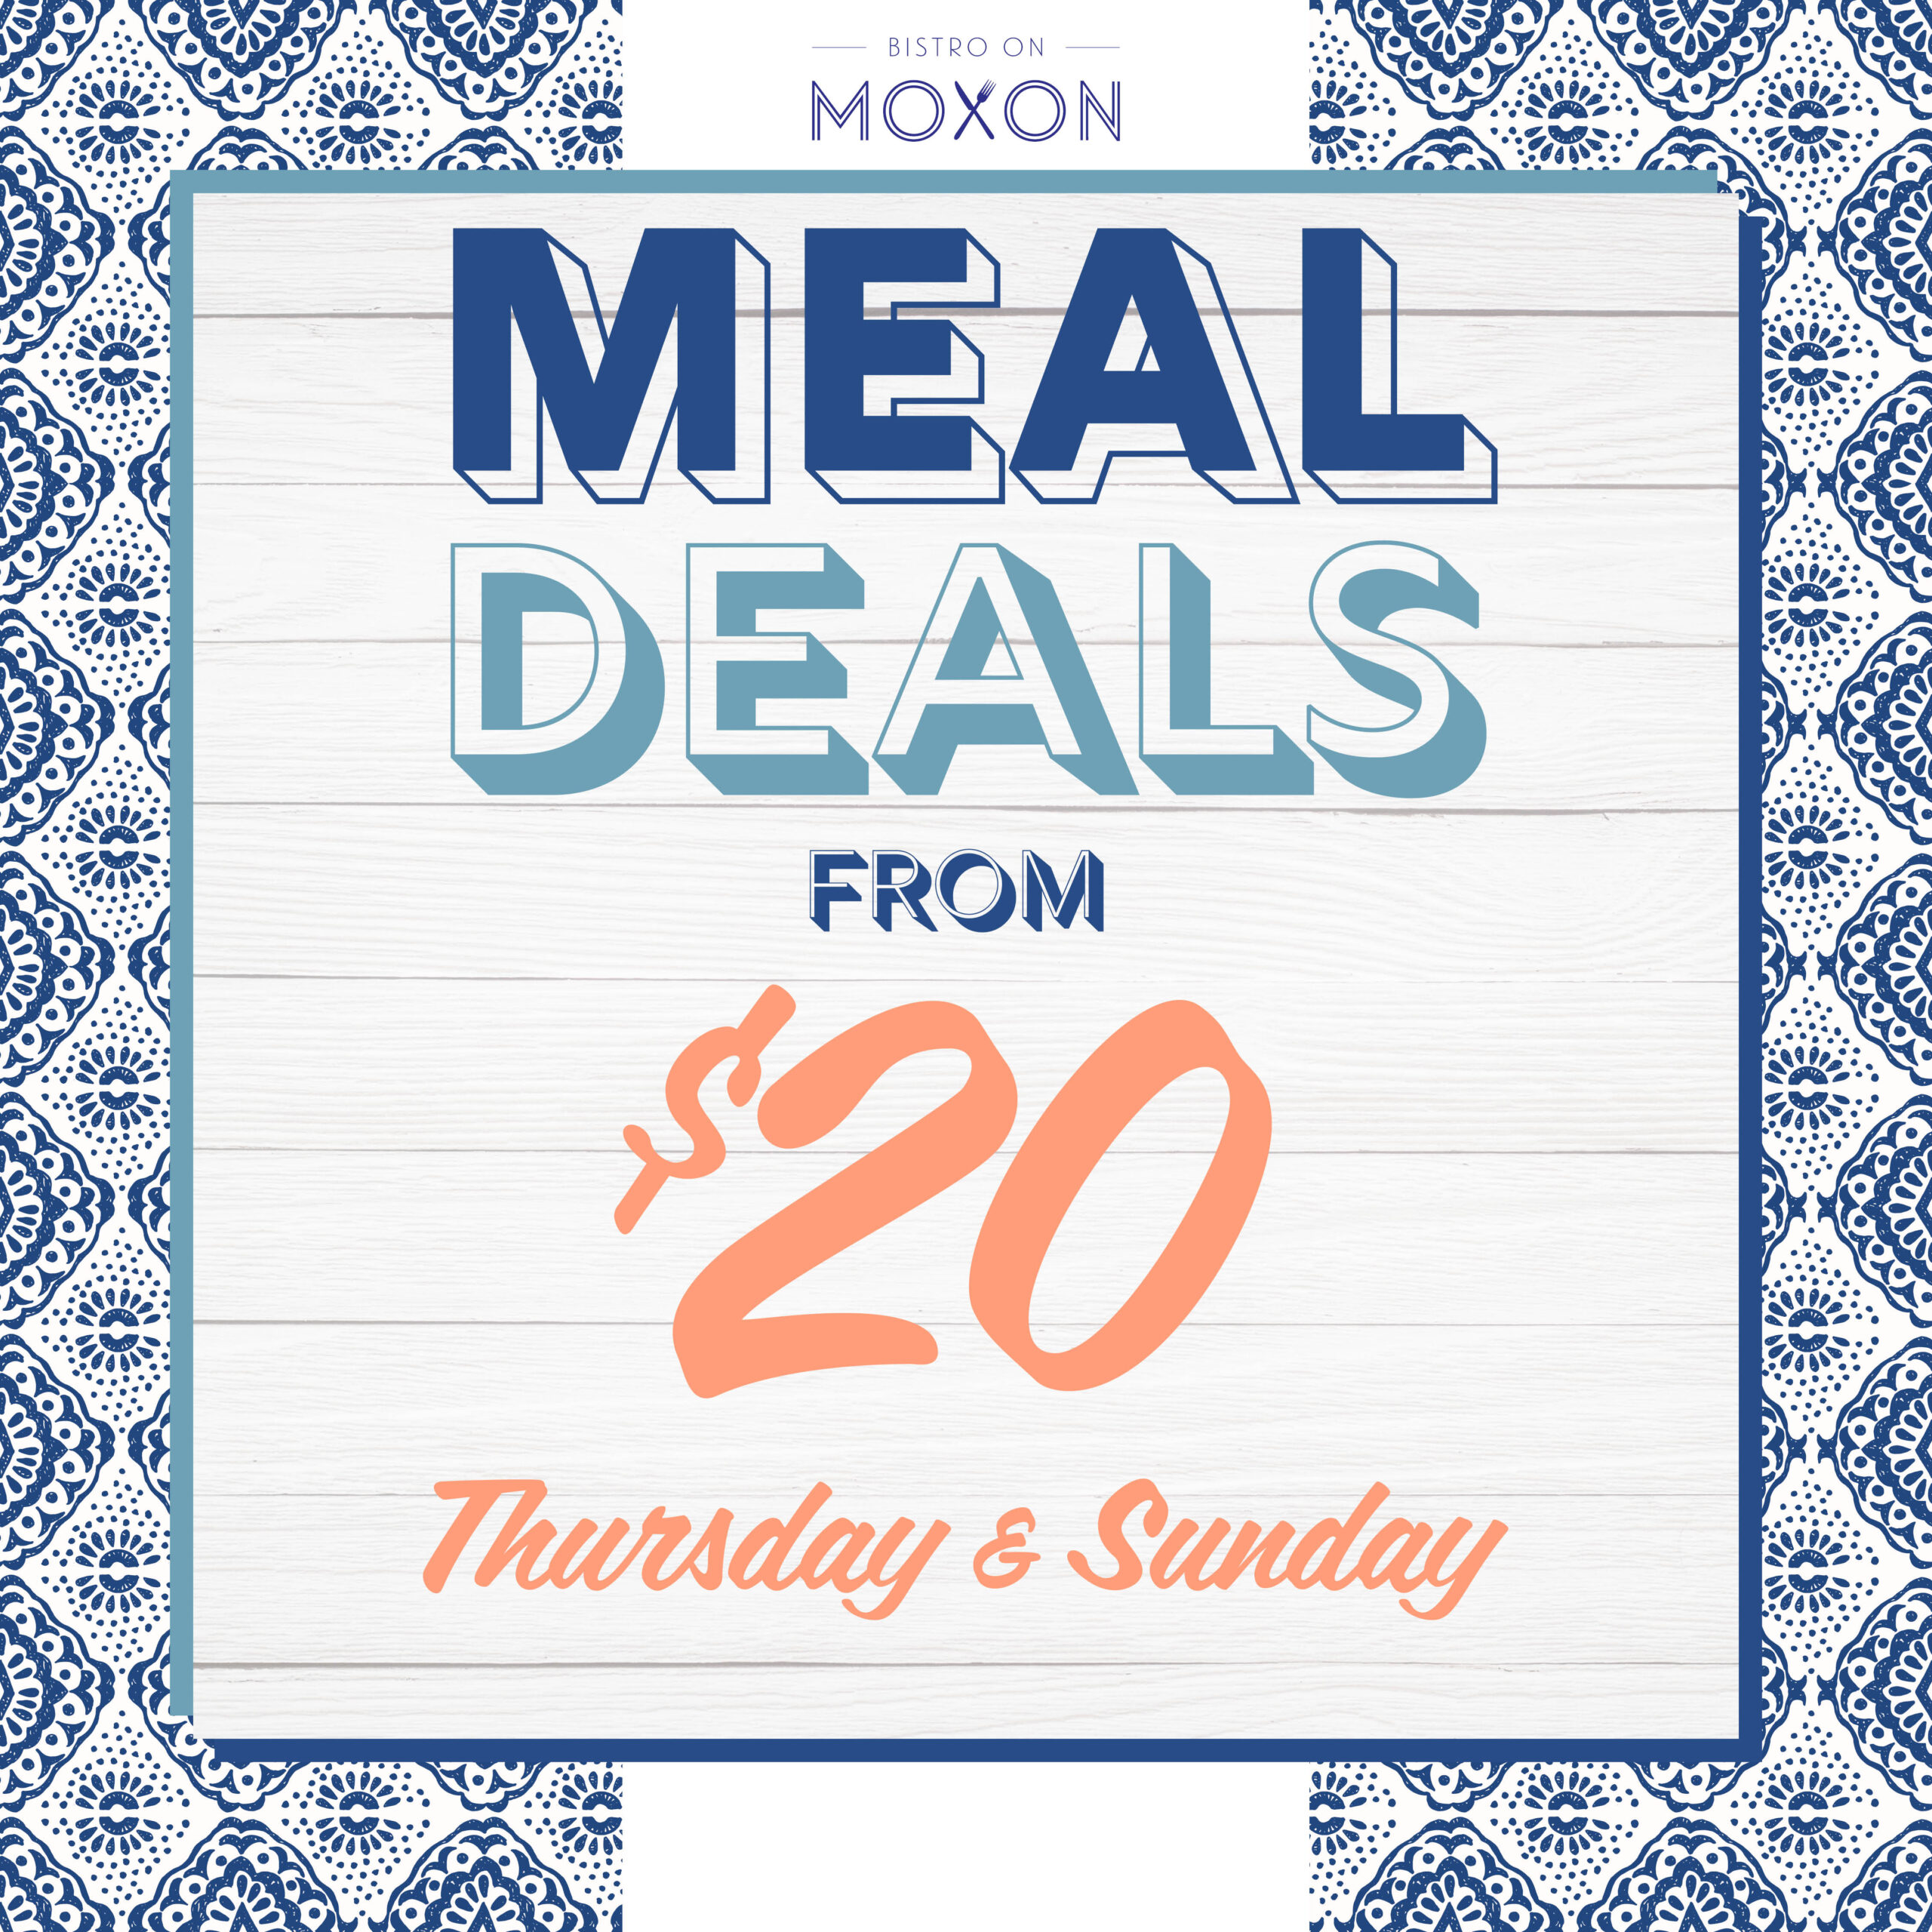 Meal Deal Special, Bistro on Moxon